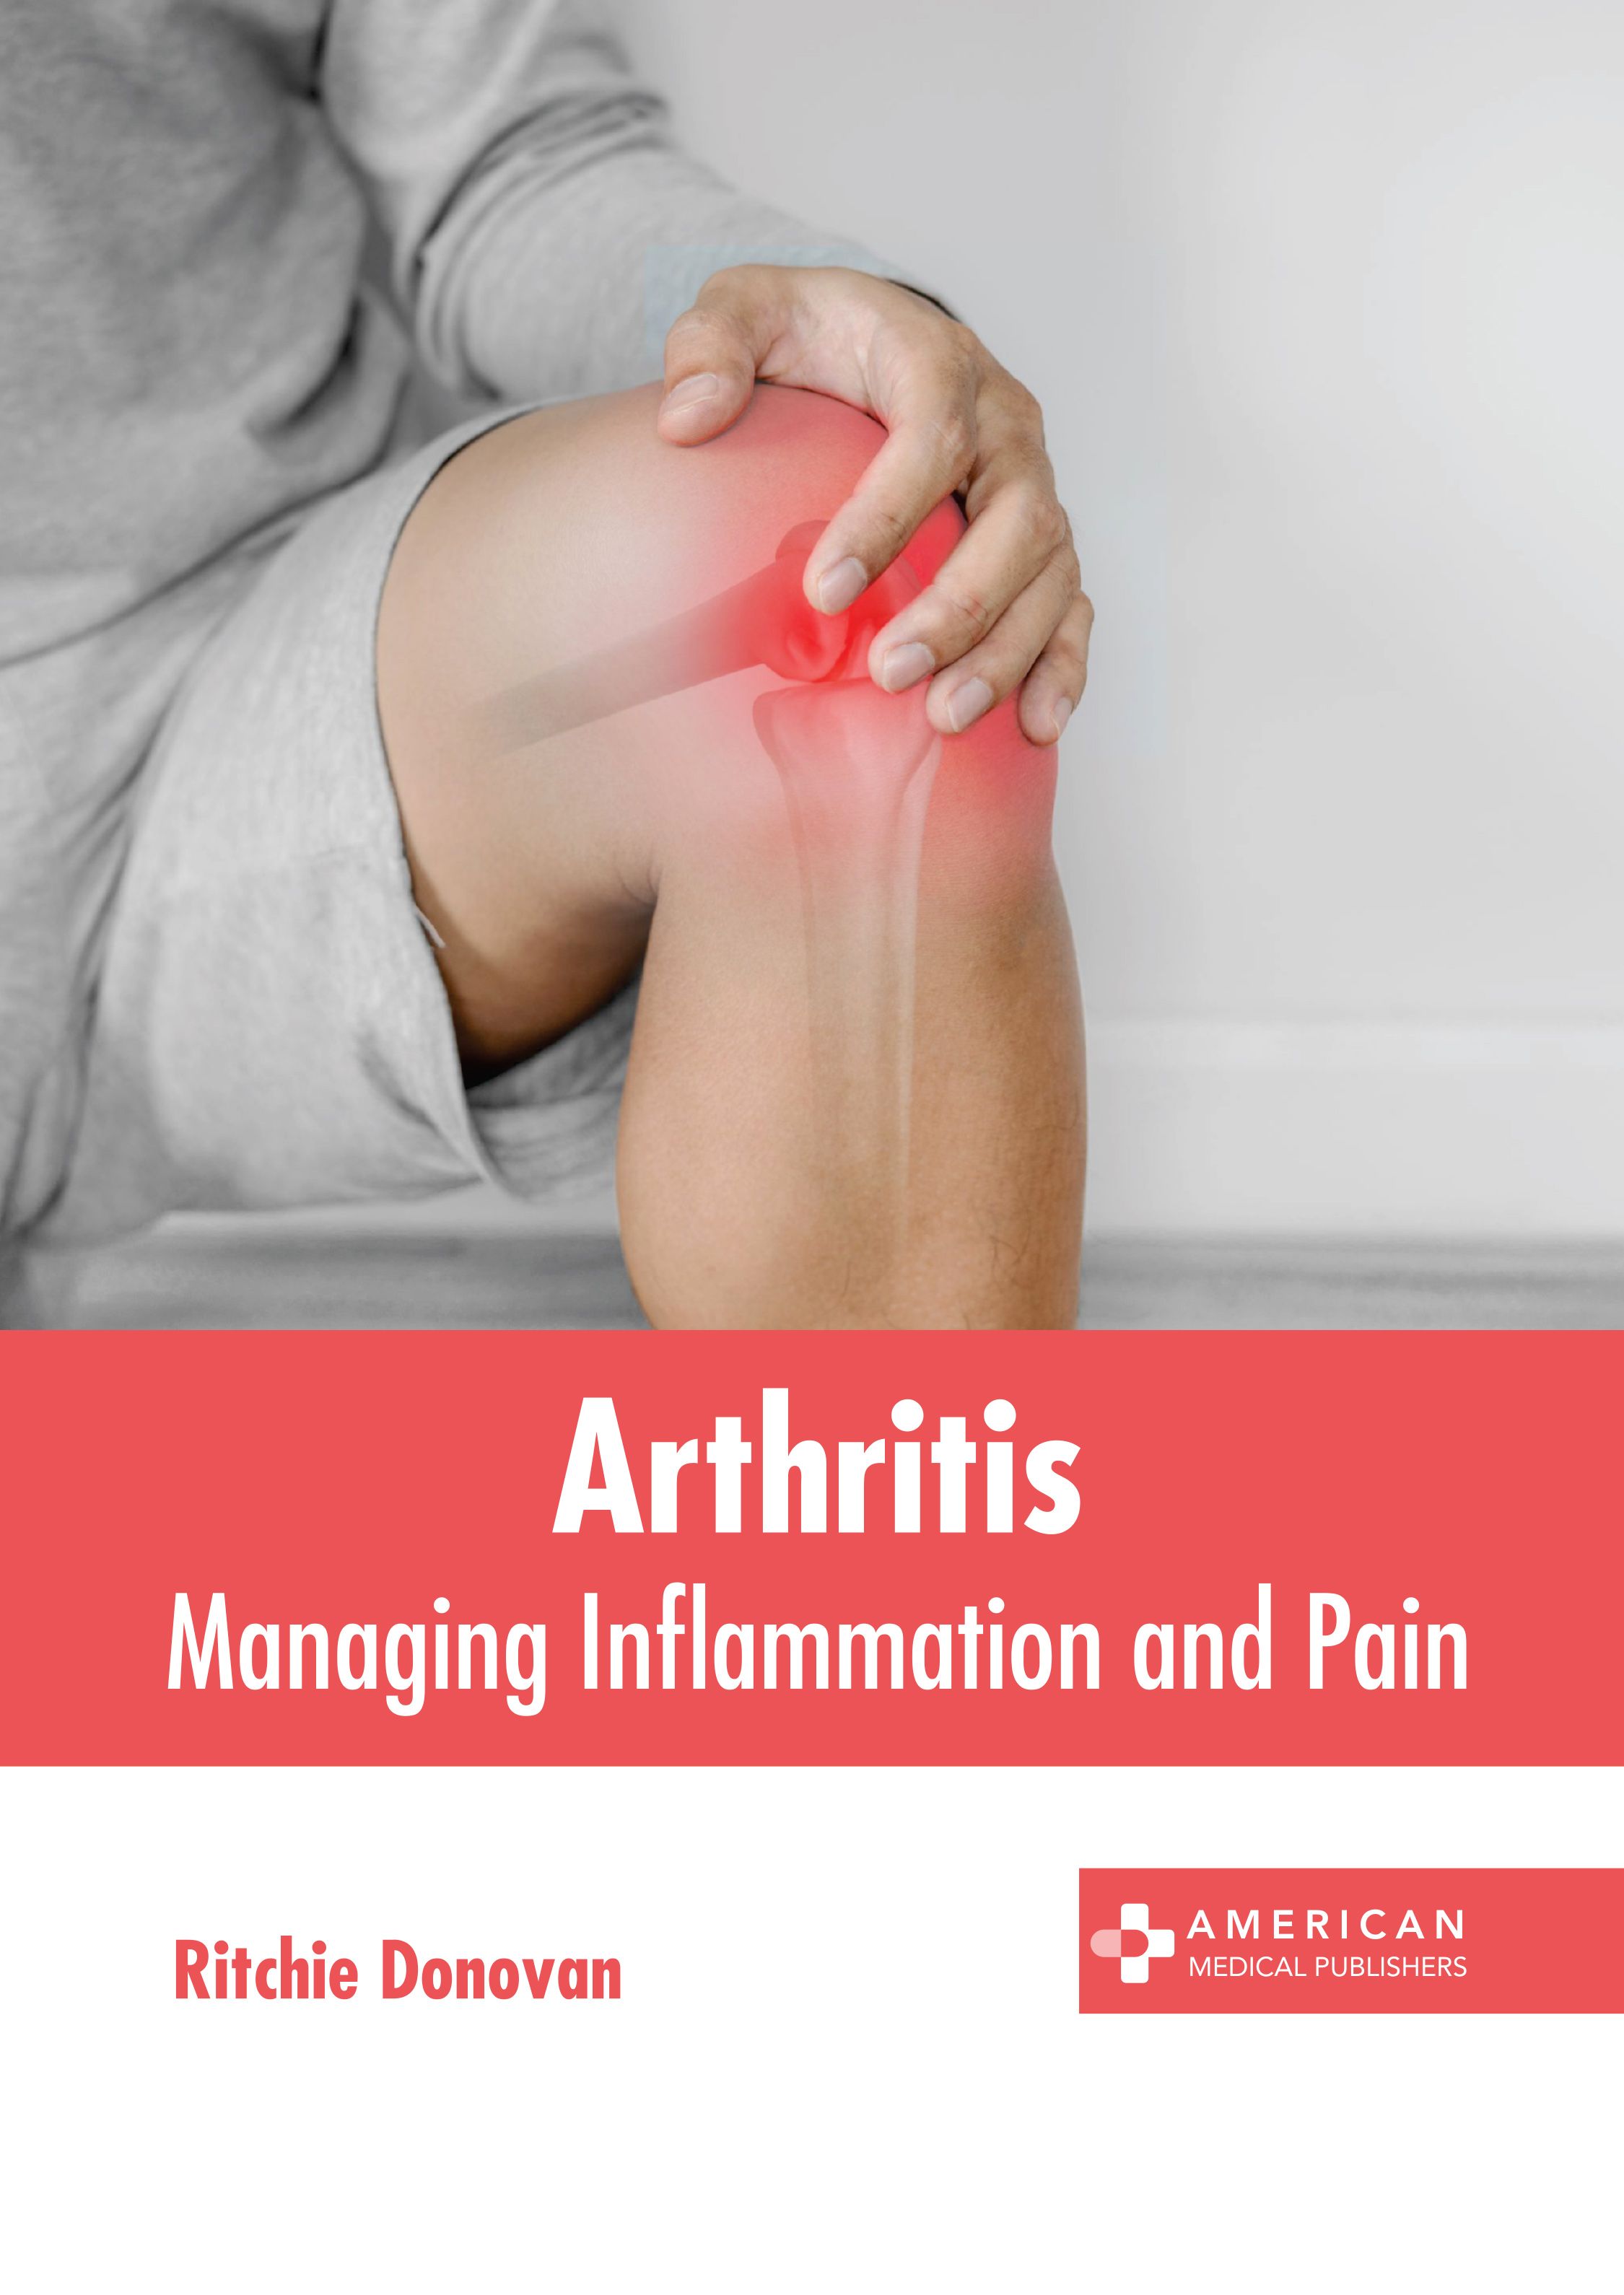 ARTHRITIS: MANAGING INFLAMMATION AND PAIN